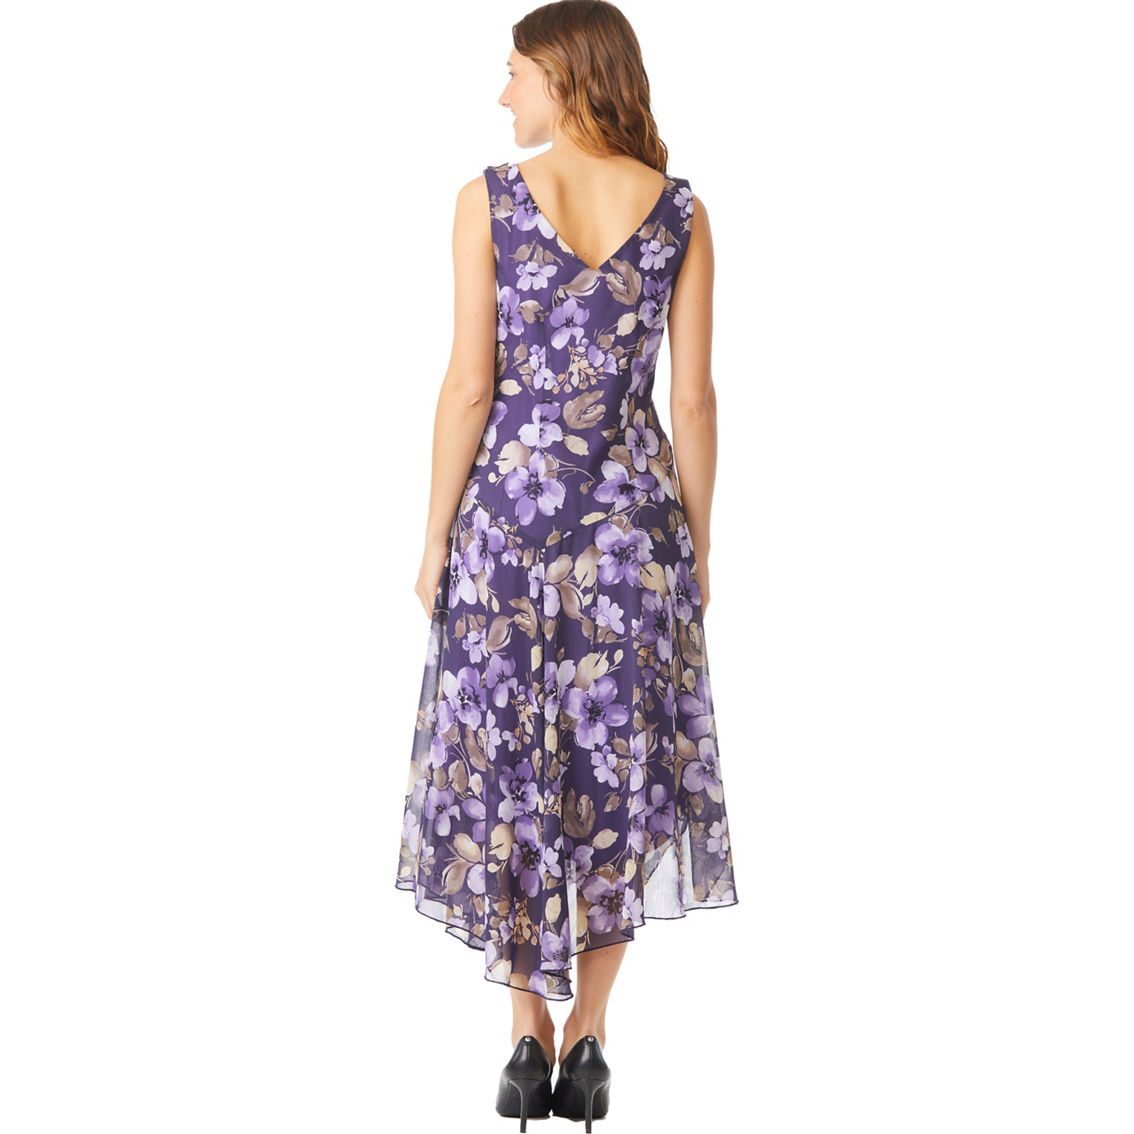 Connected Apparel Floral Chiffon Dress - Image 2 of 3